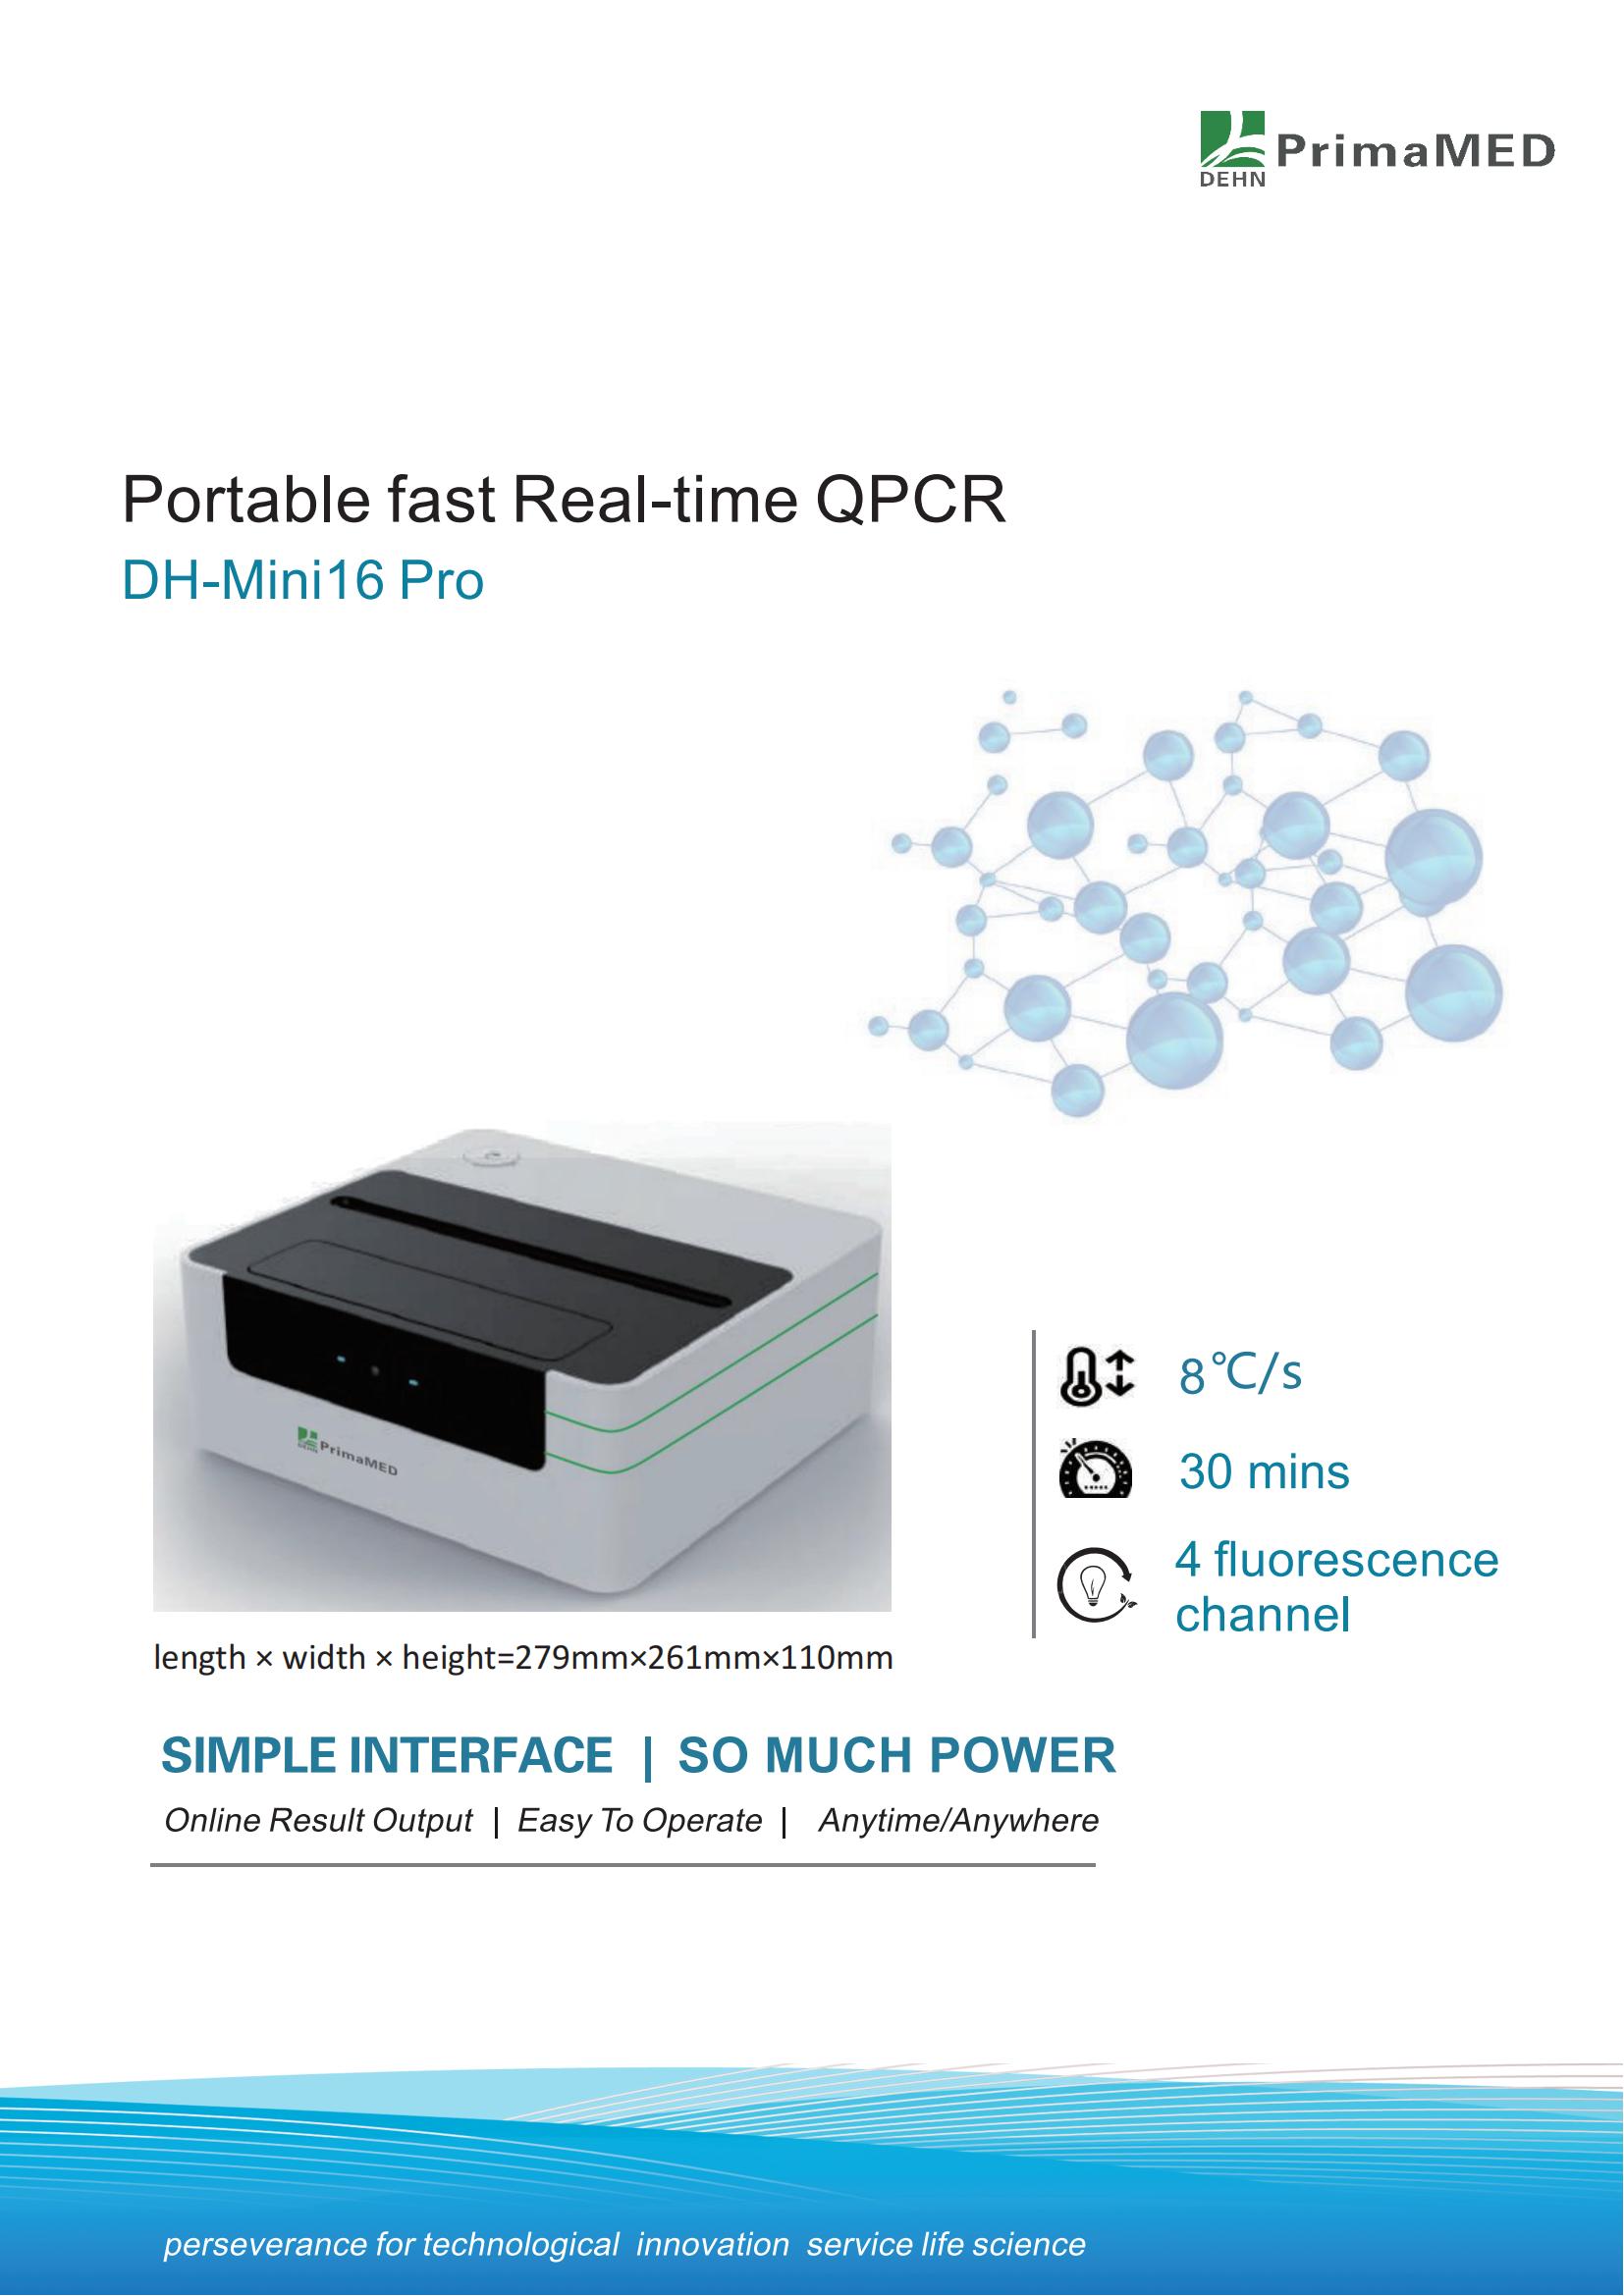 Draagbare snelle realtime QPCR